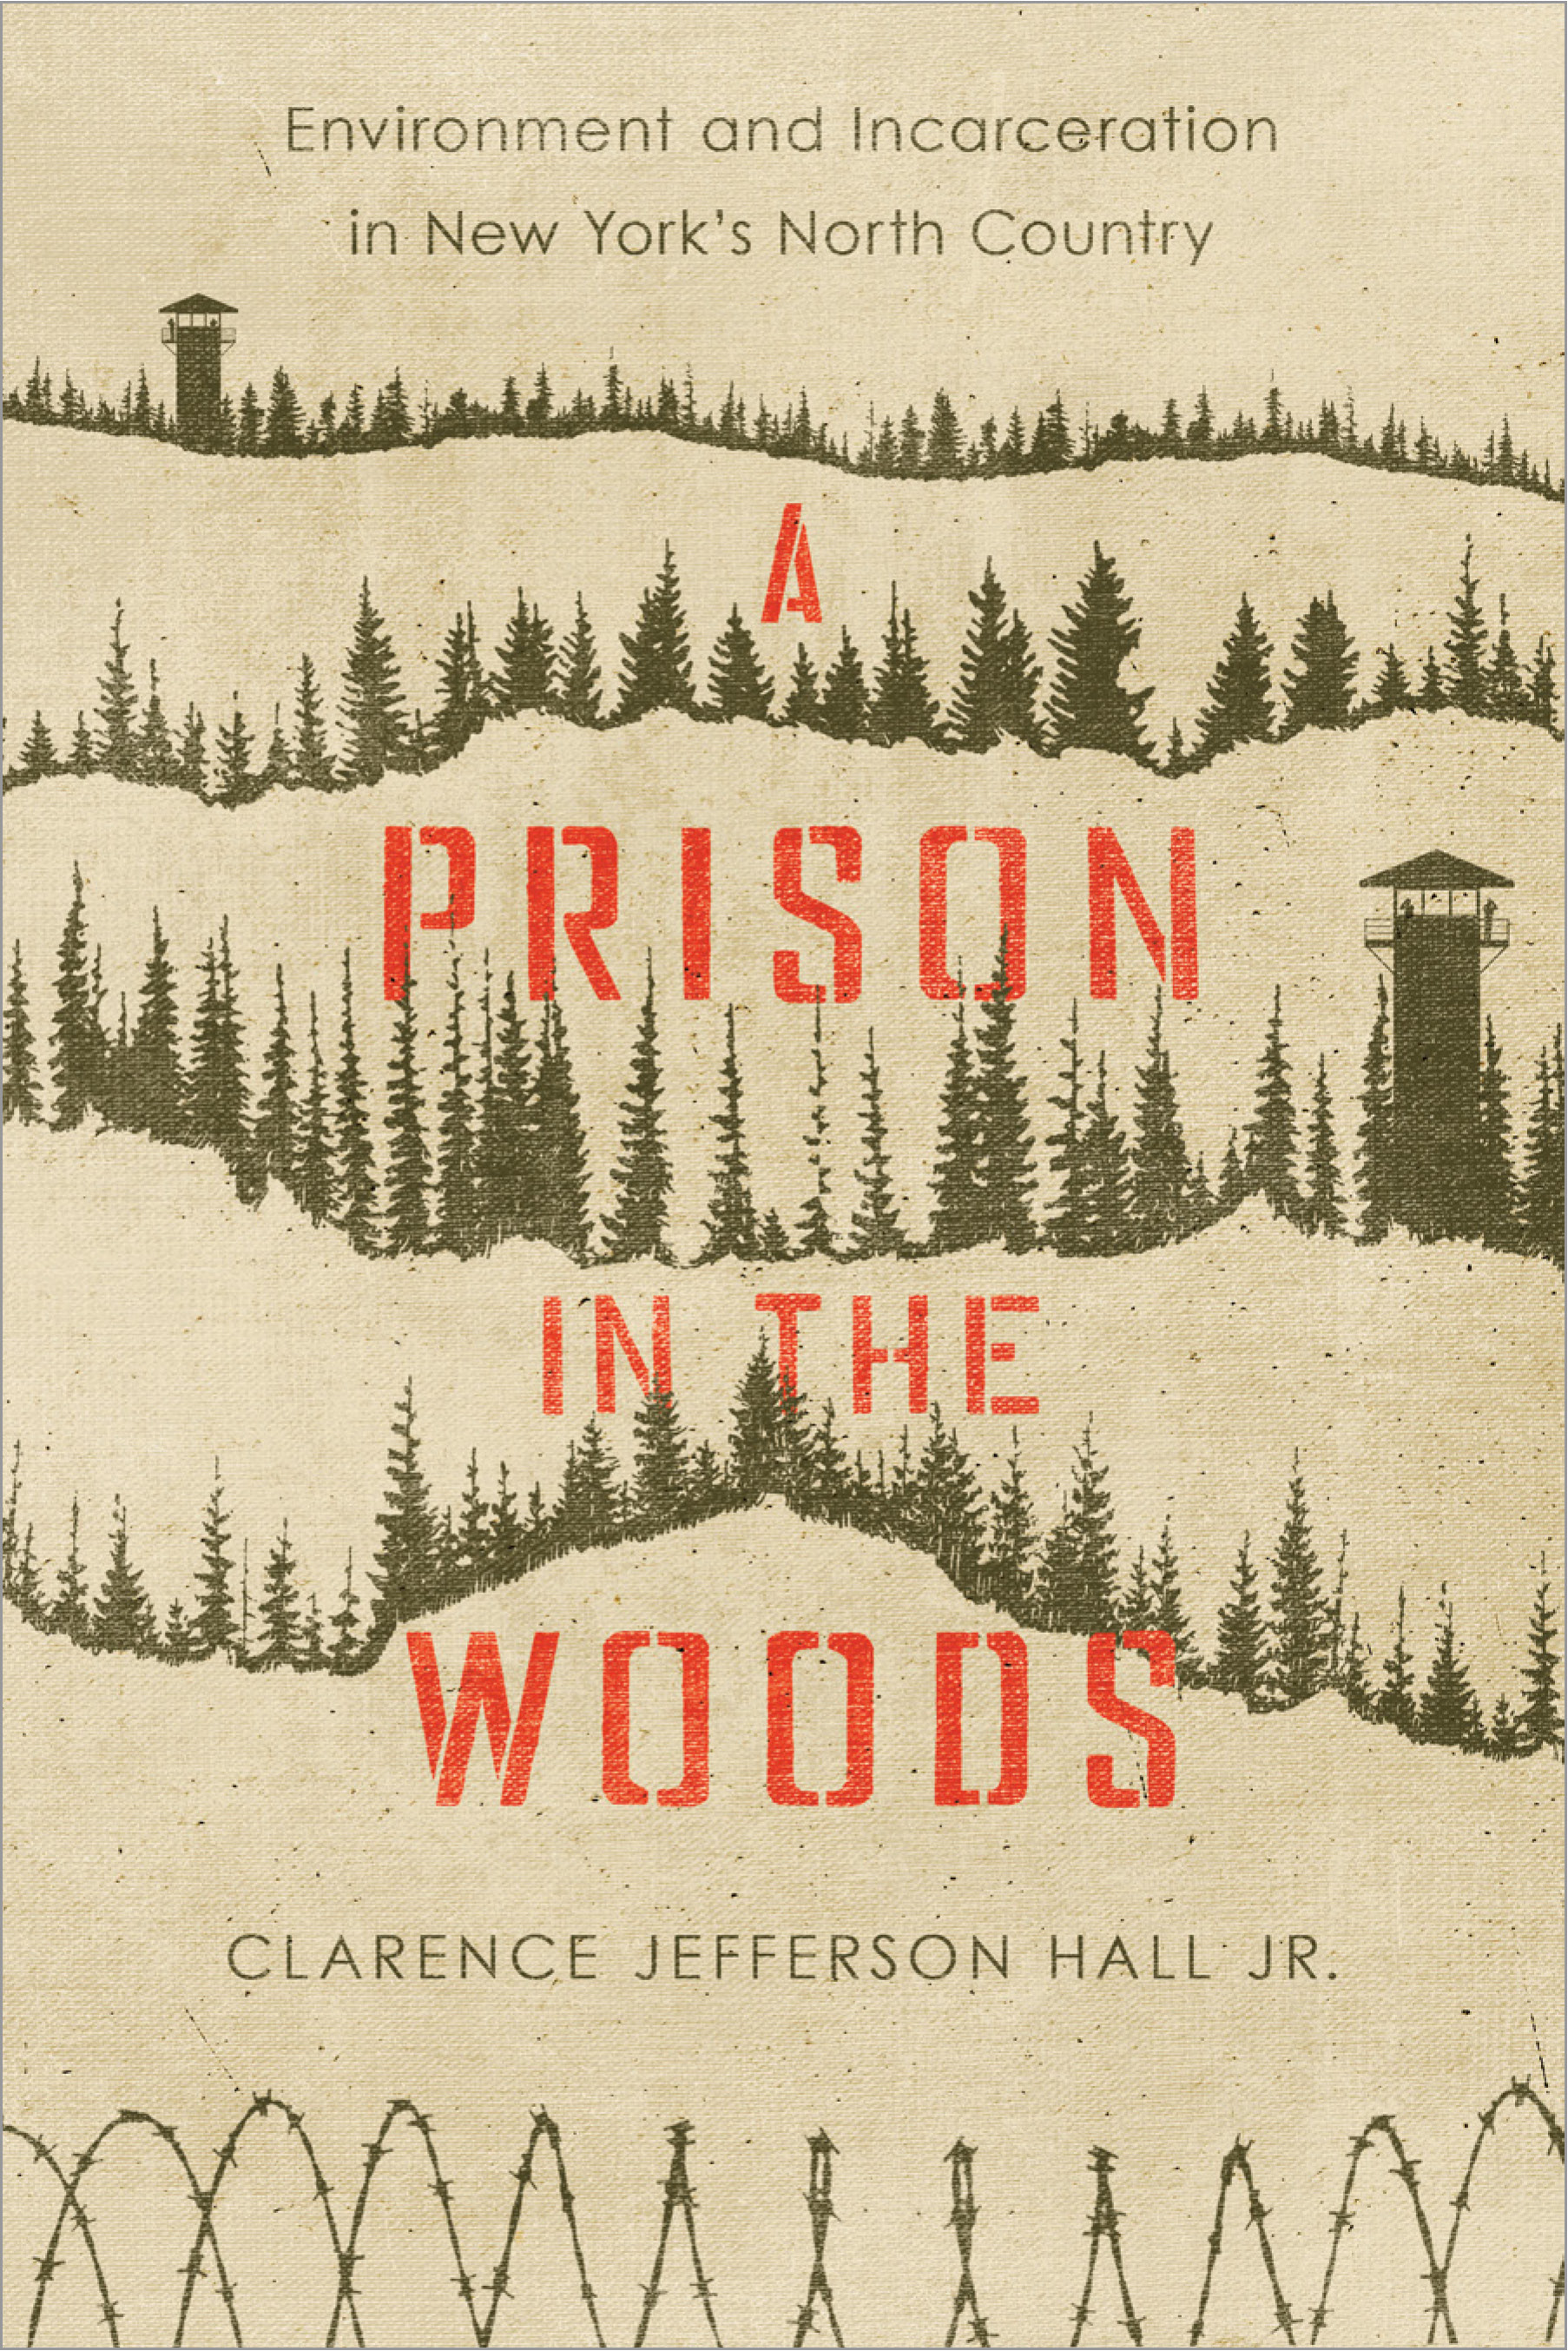 "A Prison In the Woods" book cover